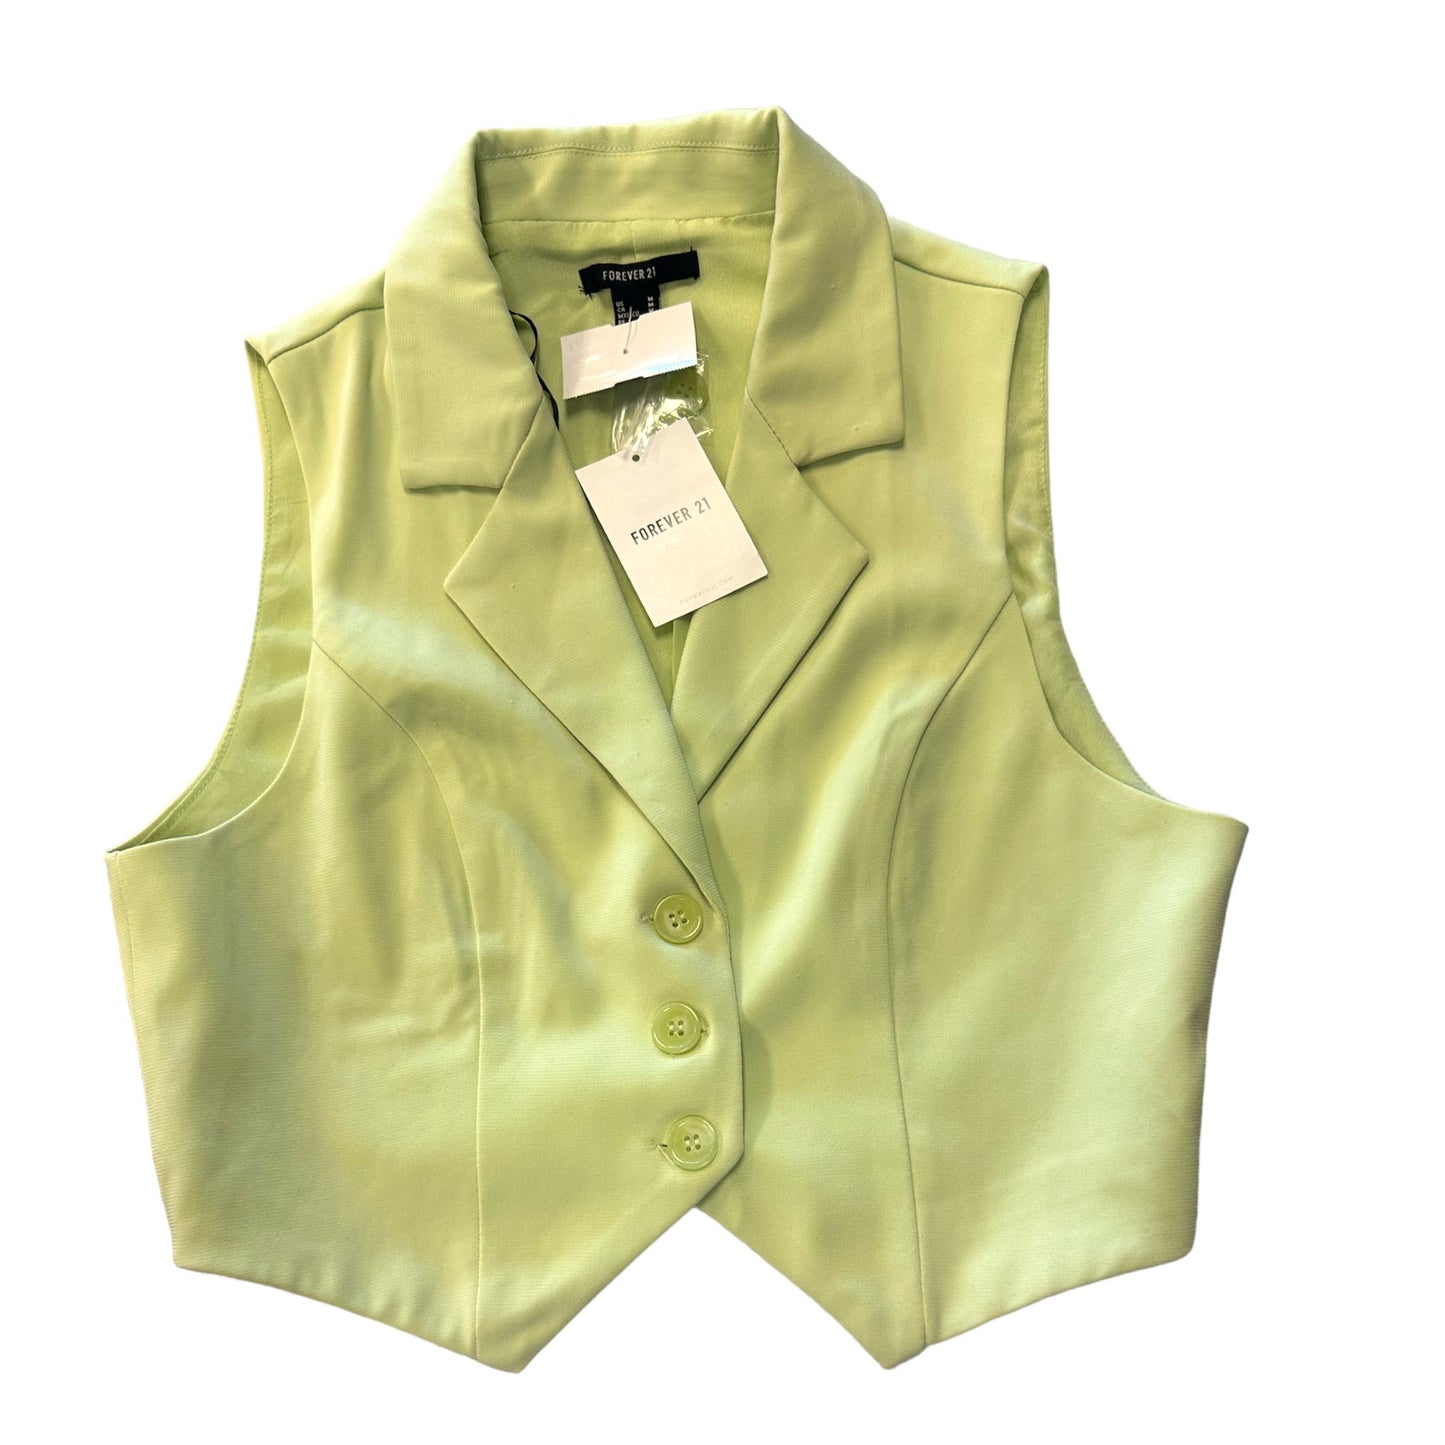 Vest Other By Forever 21  Size: M